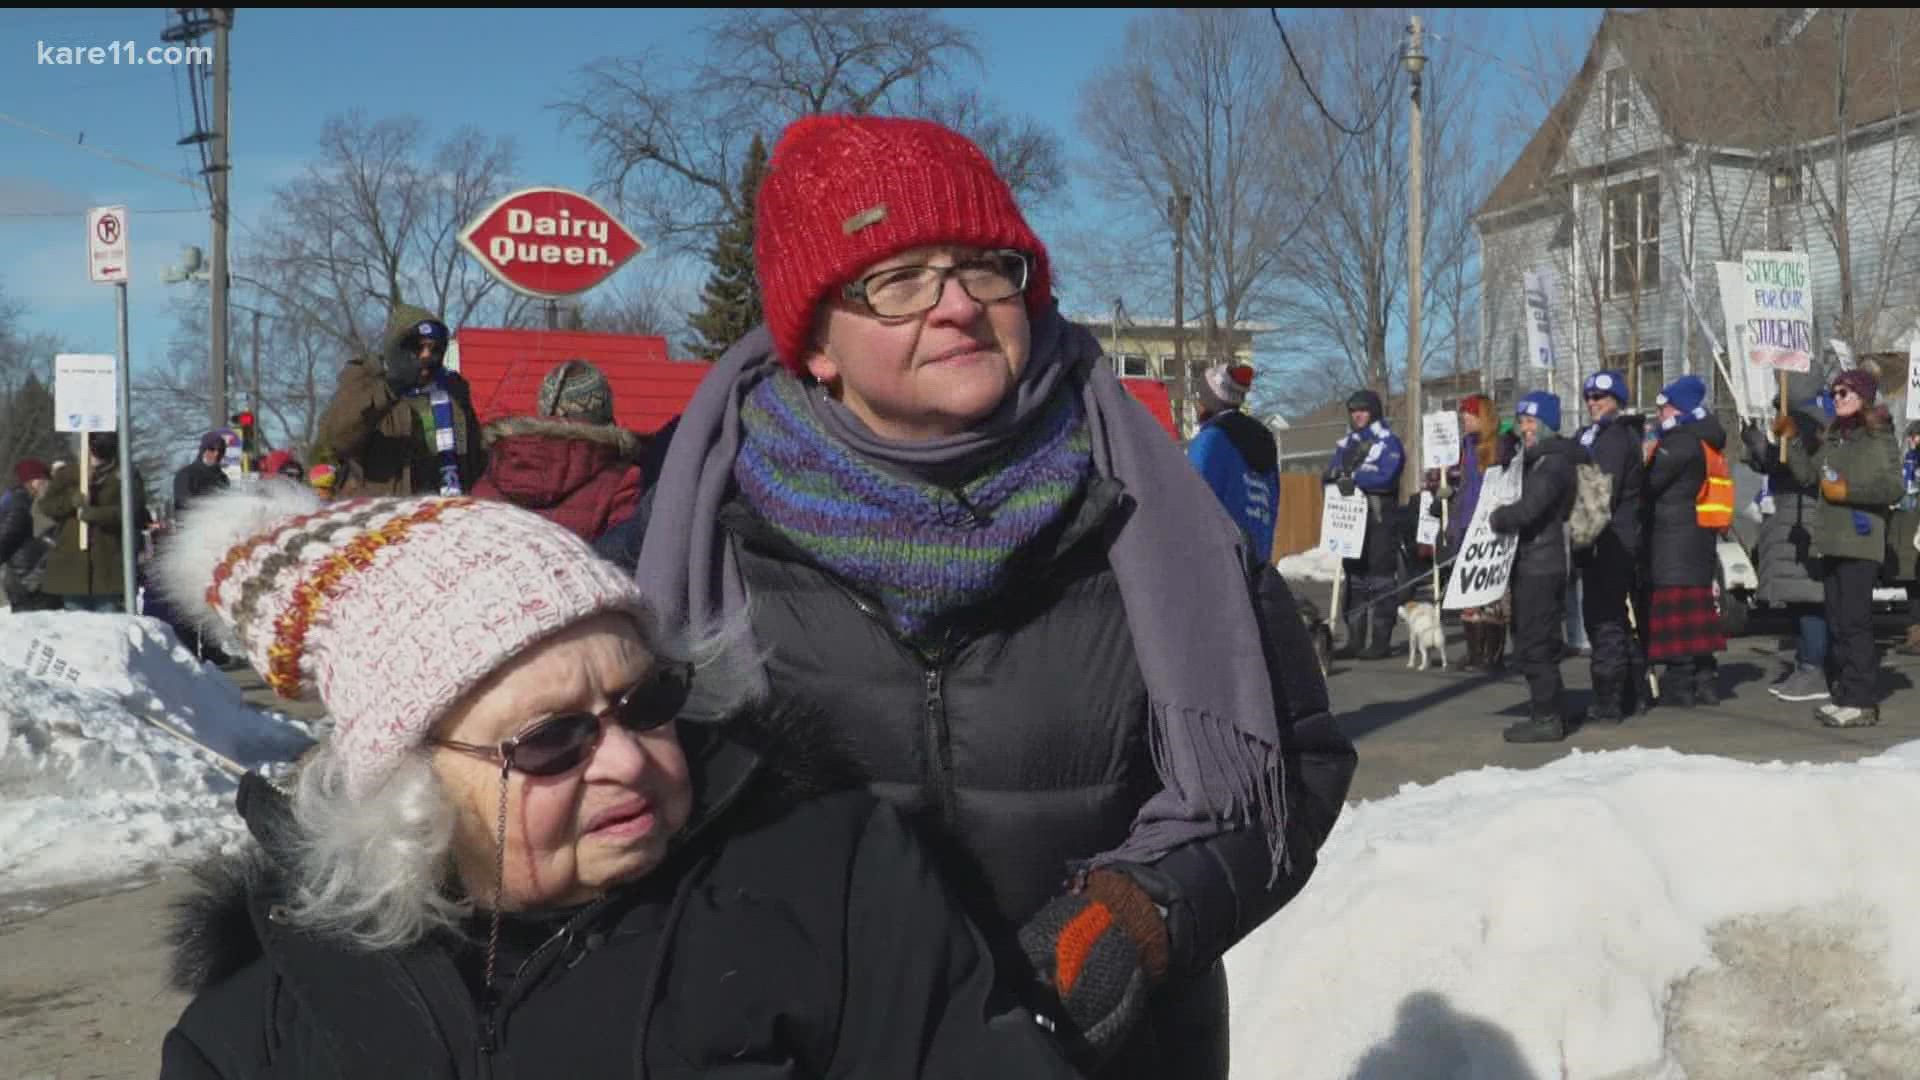 Fifty-two years after asking for better working conditions in the 1970 Minneapolis Public Schools strike, a woman is striking again, but this time for her daughter.